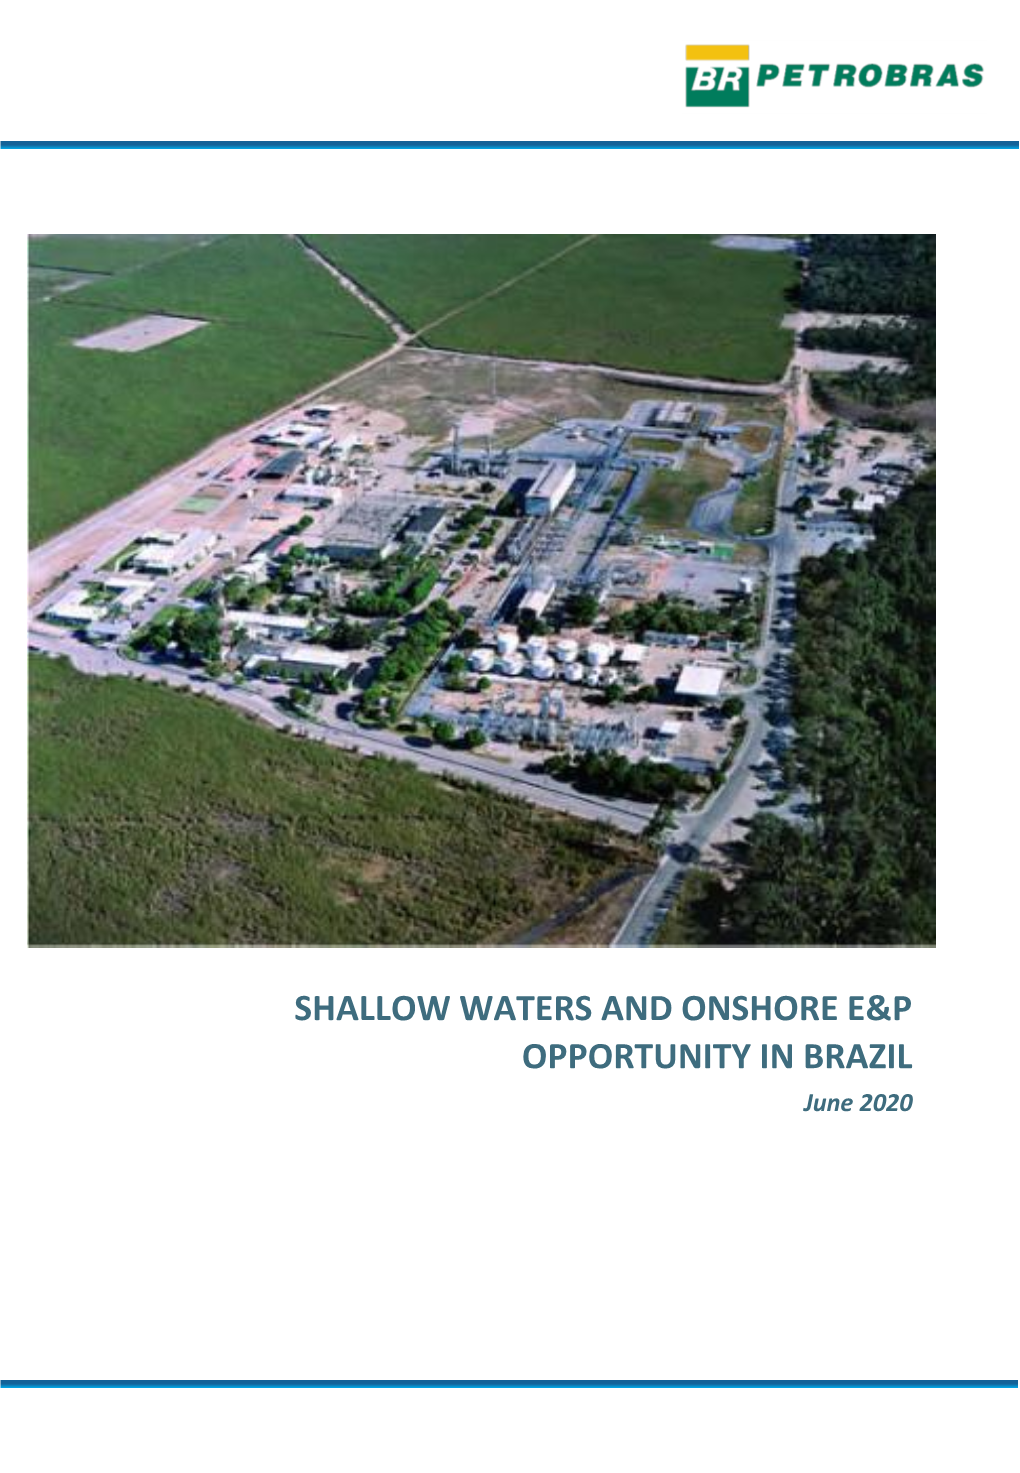 Shallow Waters and Onshore E&P Opportunity in Brazil